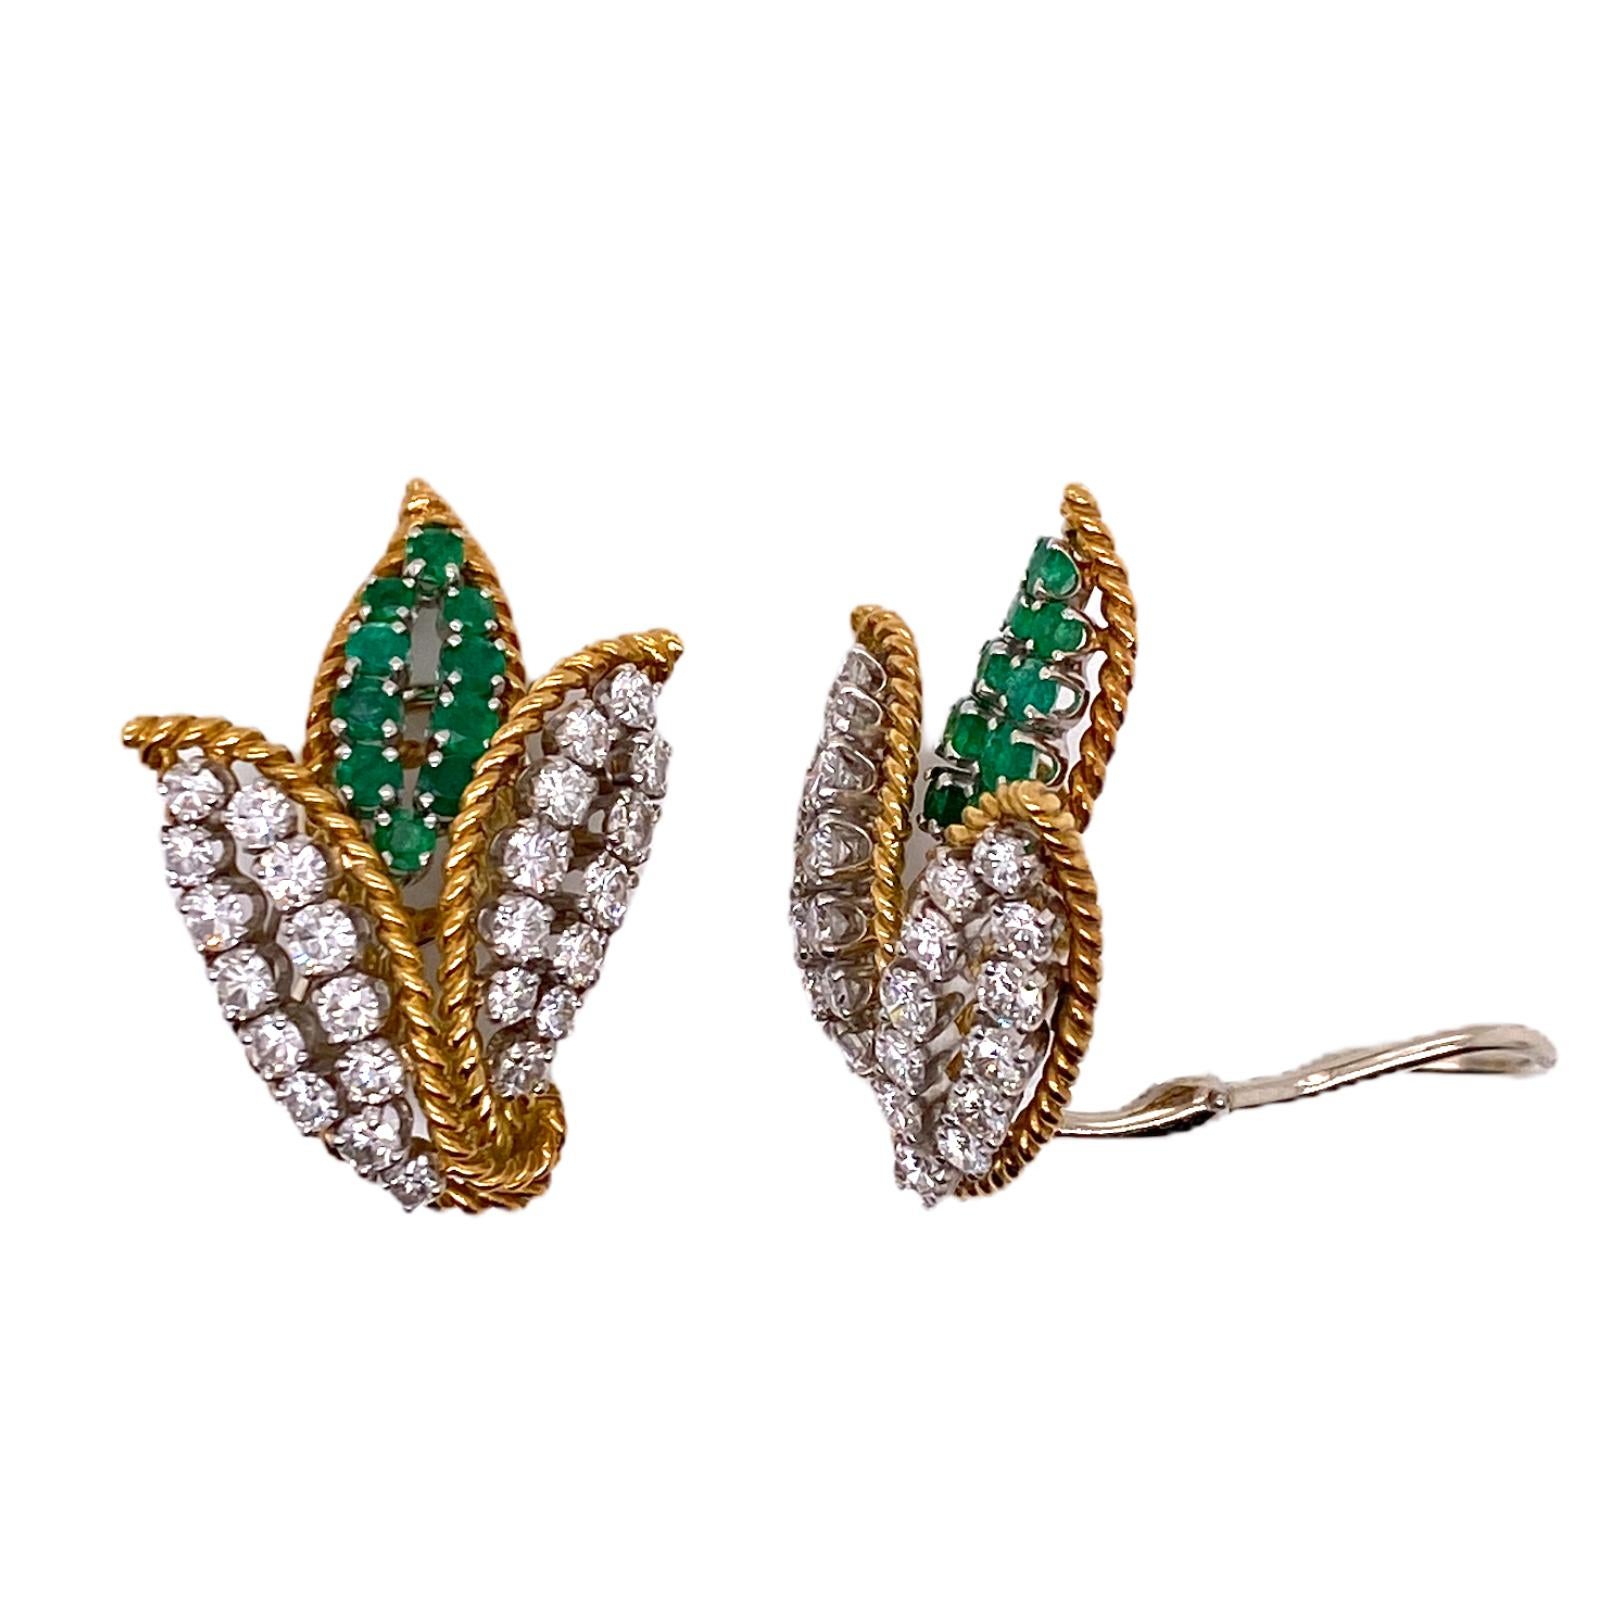 Gorgeous diamond emerald leaf motif earrings fashioned in 18 karat yellow gold and platinum. The earrings feature 50 round brilliant cut diamonds weighing 3.00 carat total weight and graded F-G color and VS clarity. The center leaf is set with 20